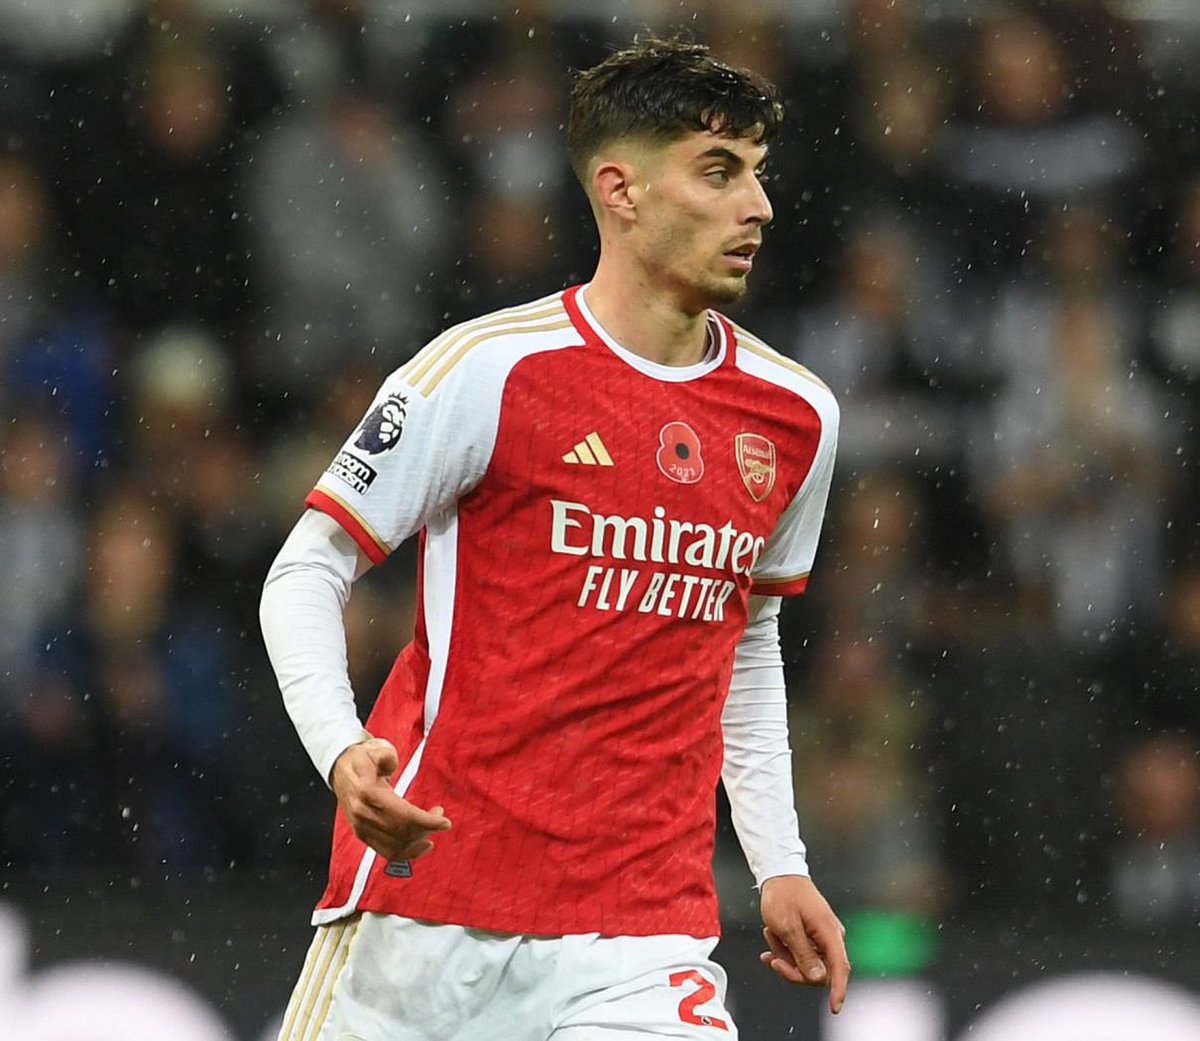 Trust the process Gunners 🔴⚪

What do you think of Havertz Improvement so far??

#ARSSEV